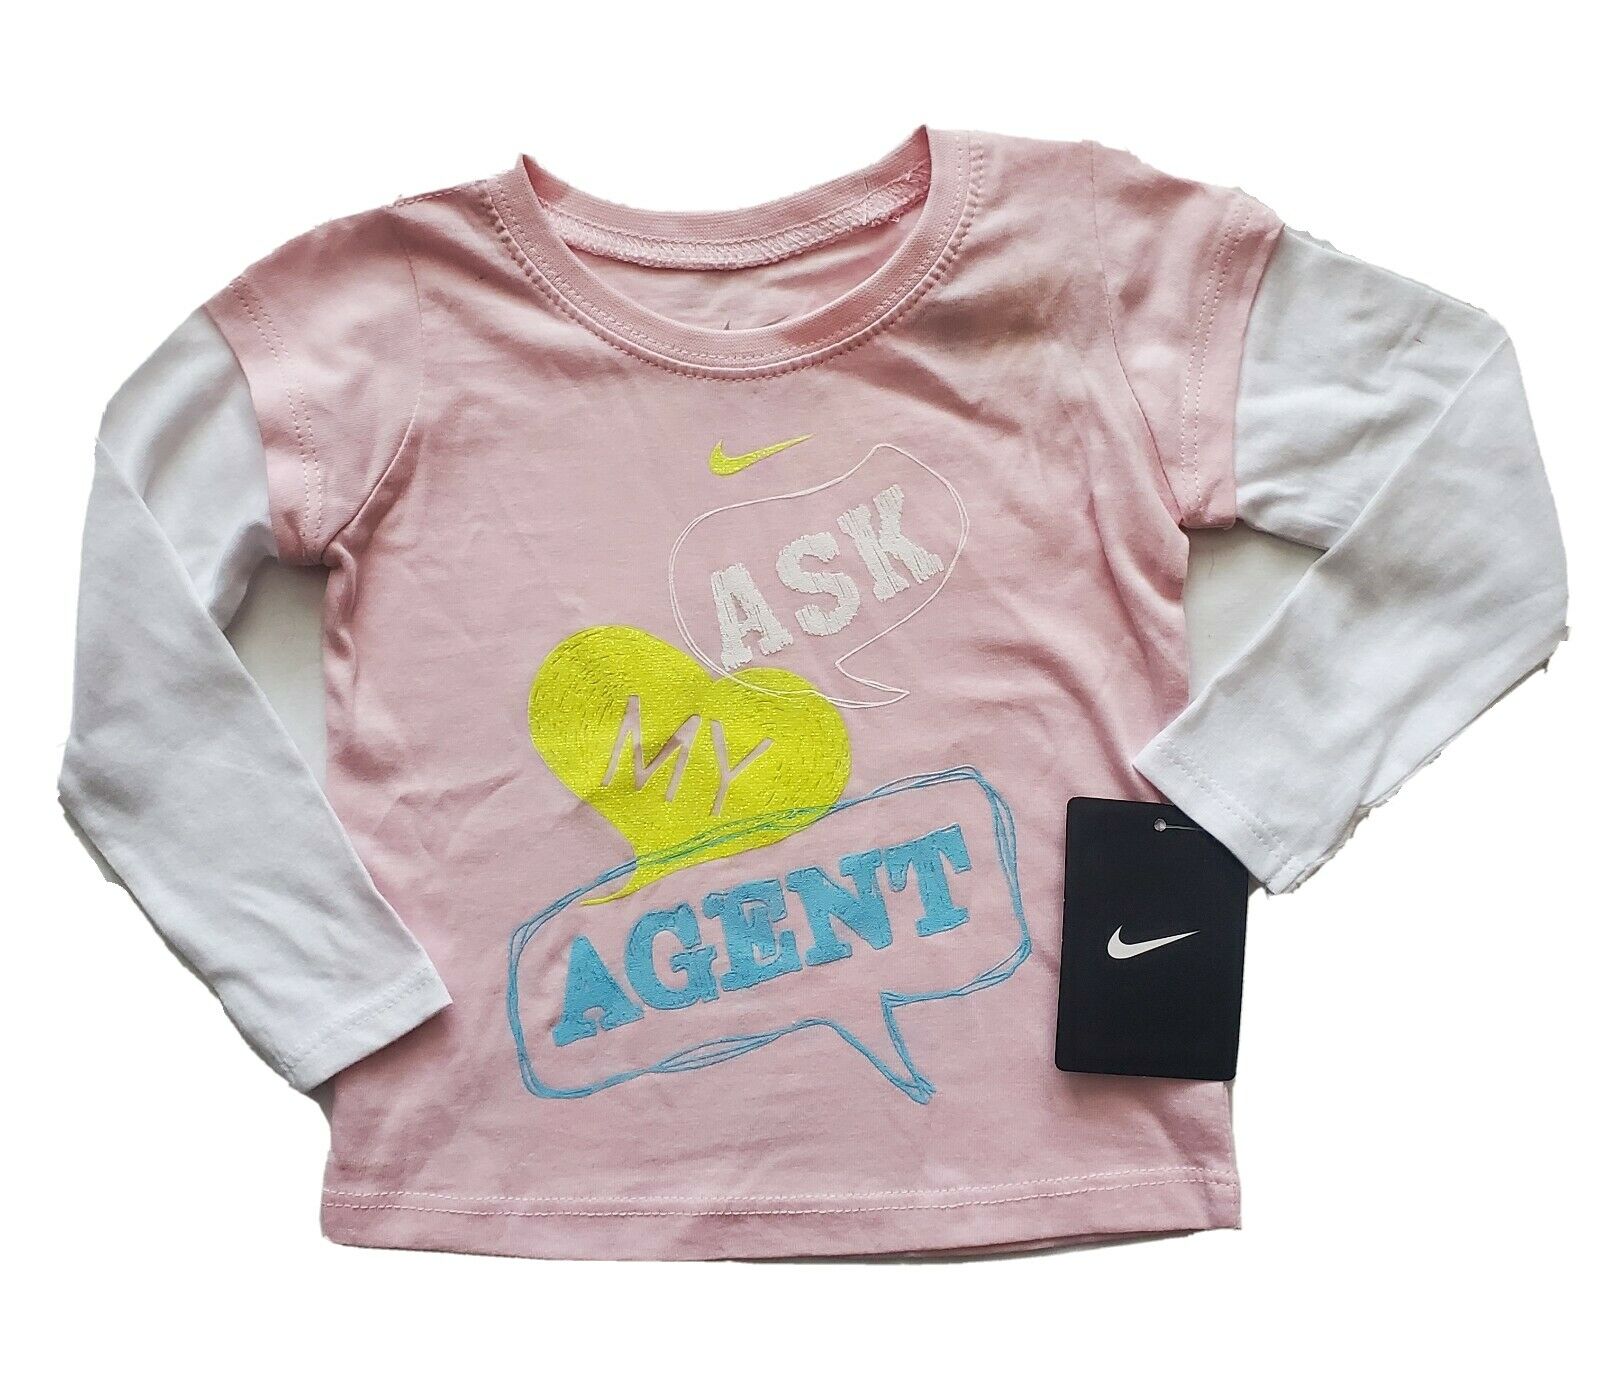 Nike Long Sleeved T Shirt, Girls Size 18 Months, Pink / White, Ask My Agent